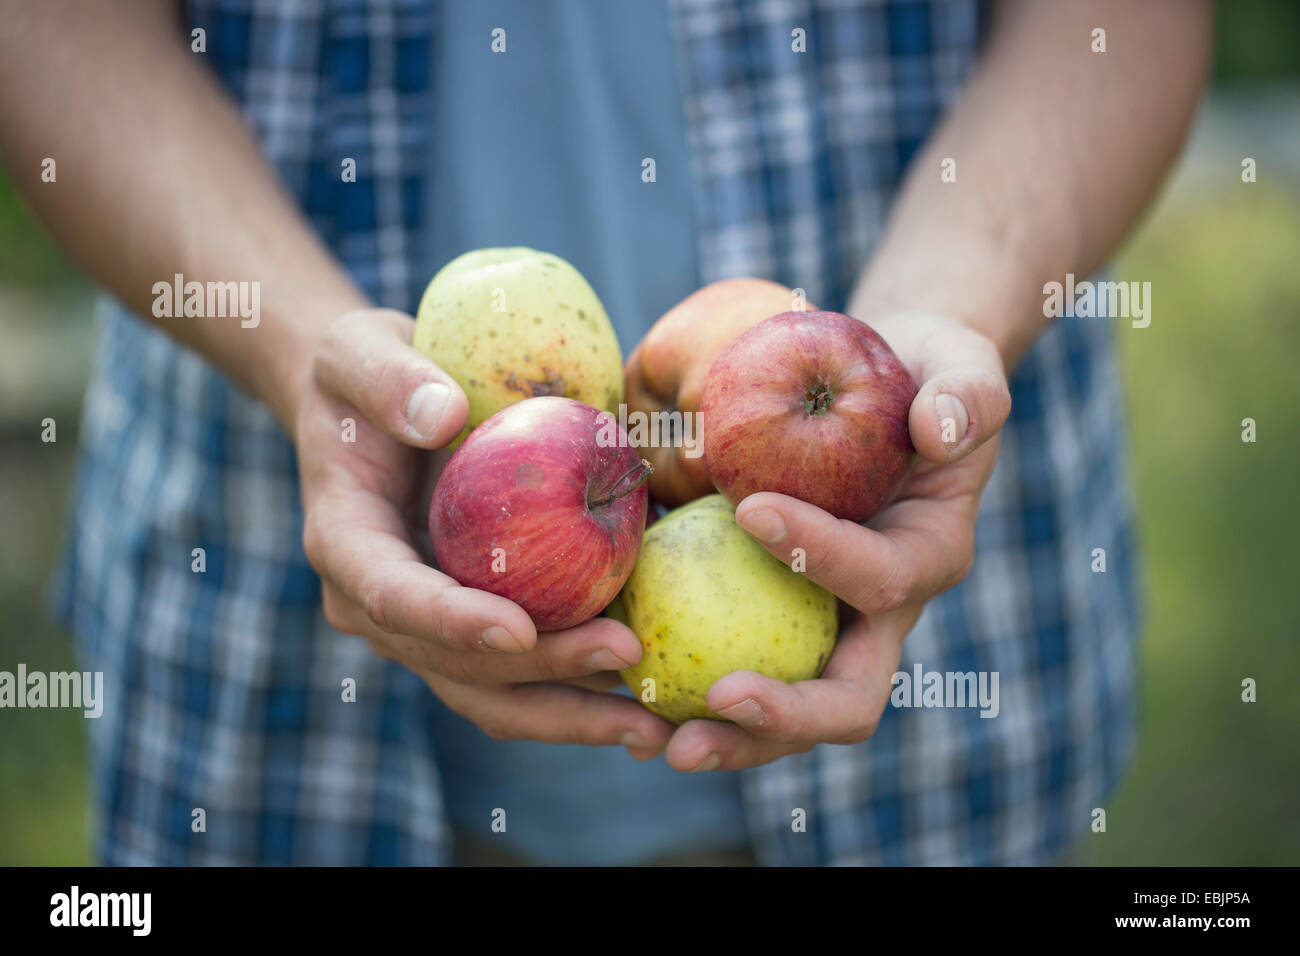 Hands of young male farmer holding apples, Premosello, Verbania, Piemonte, Italy Stock Photo